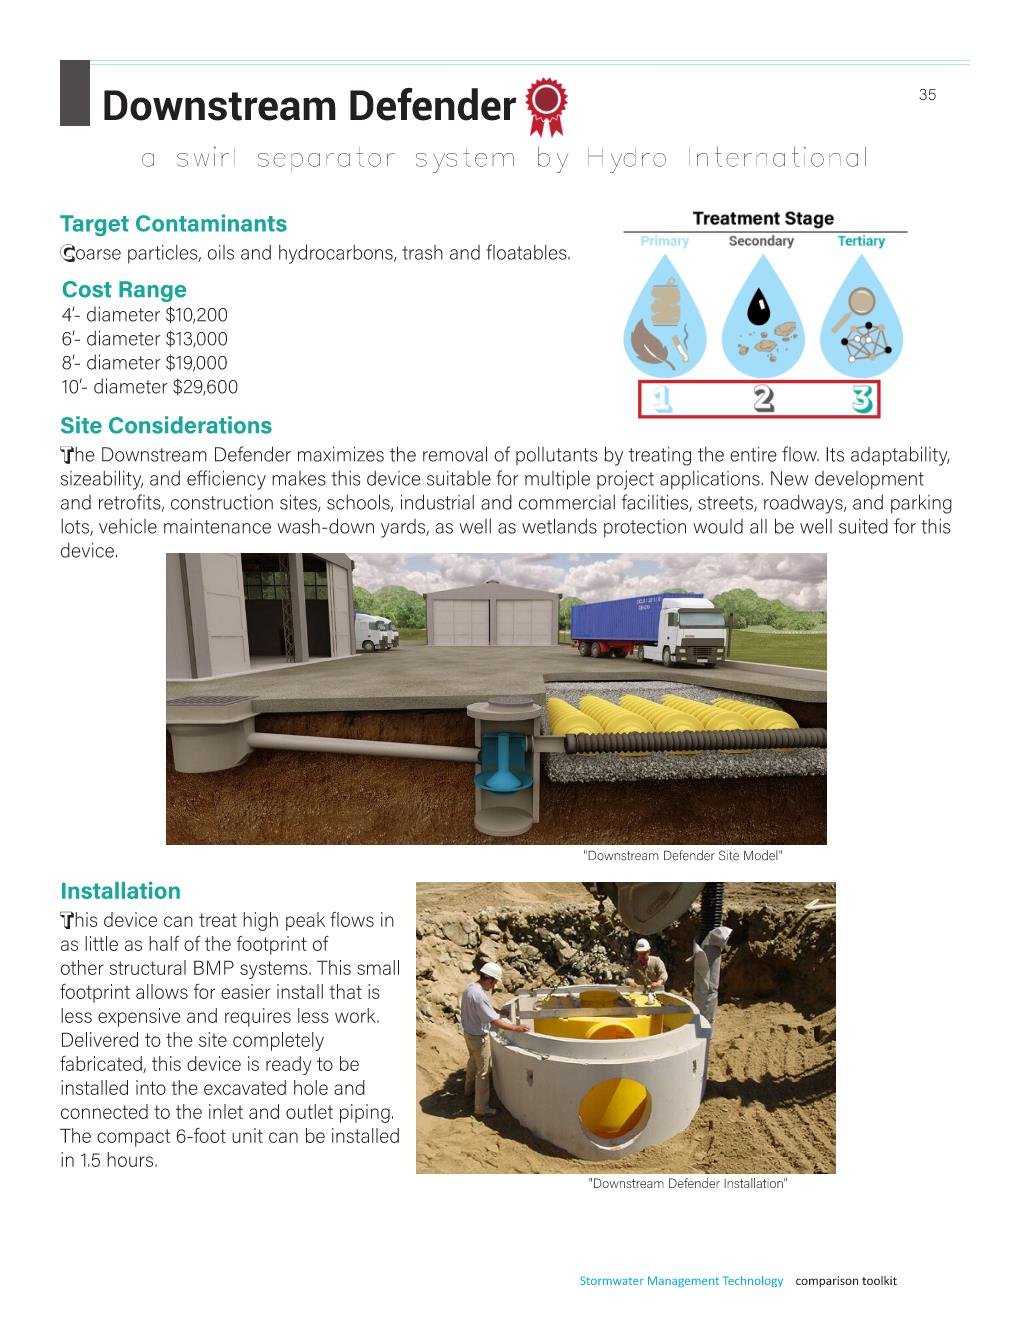 Stormwater Management Technology Comparison Toolkit Page 035.jpg